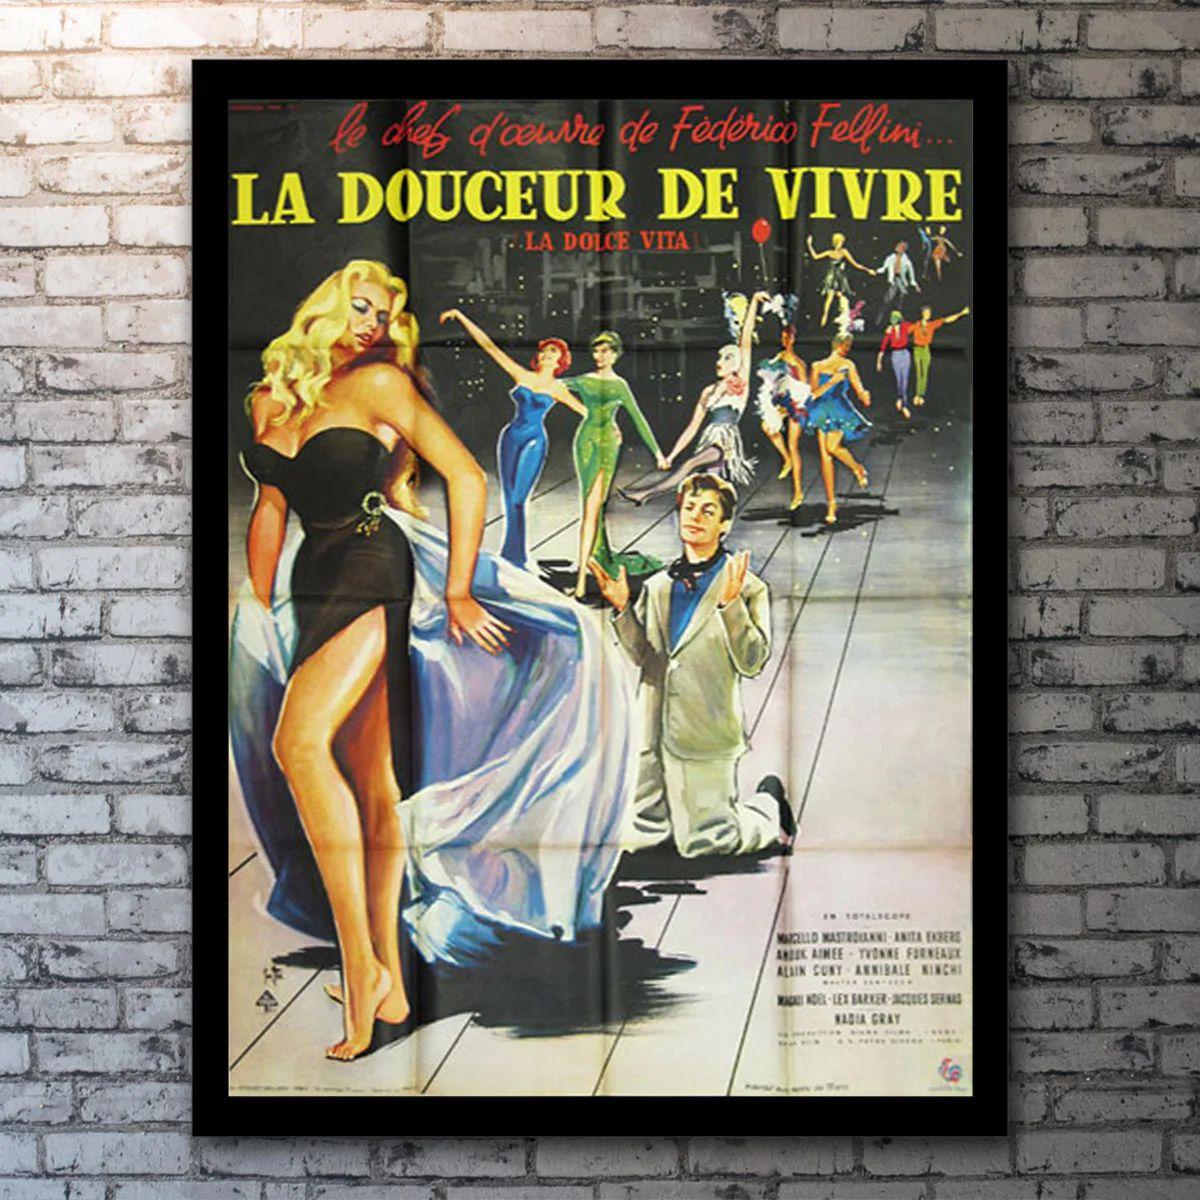 La Dolce Vita, Unframed Poster, 1960

Original One Panel (47 X 63 Inches). A series of stories following a week in the life of a philandering tabloid journalist living in Rome.

Year: 1960
Nationality: French
Condition: Folded
Type: Original